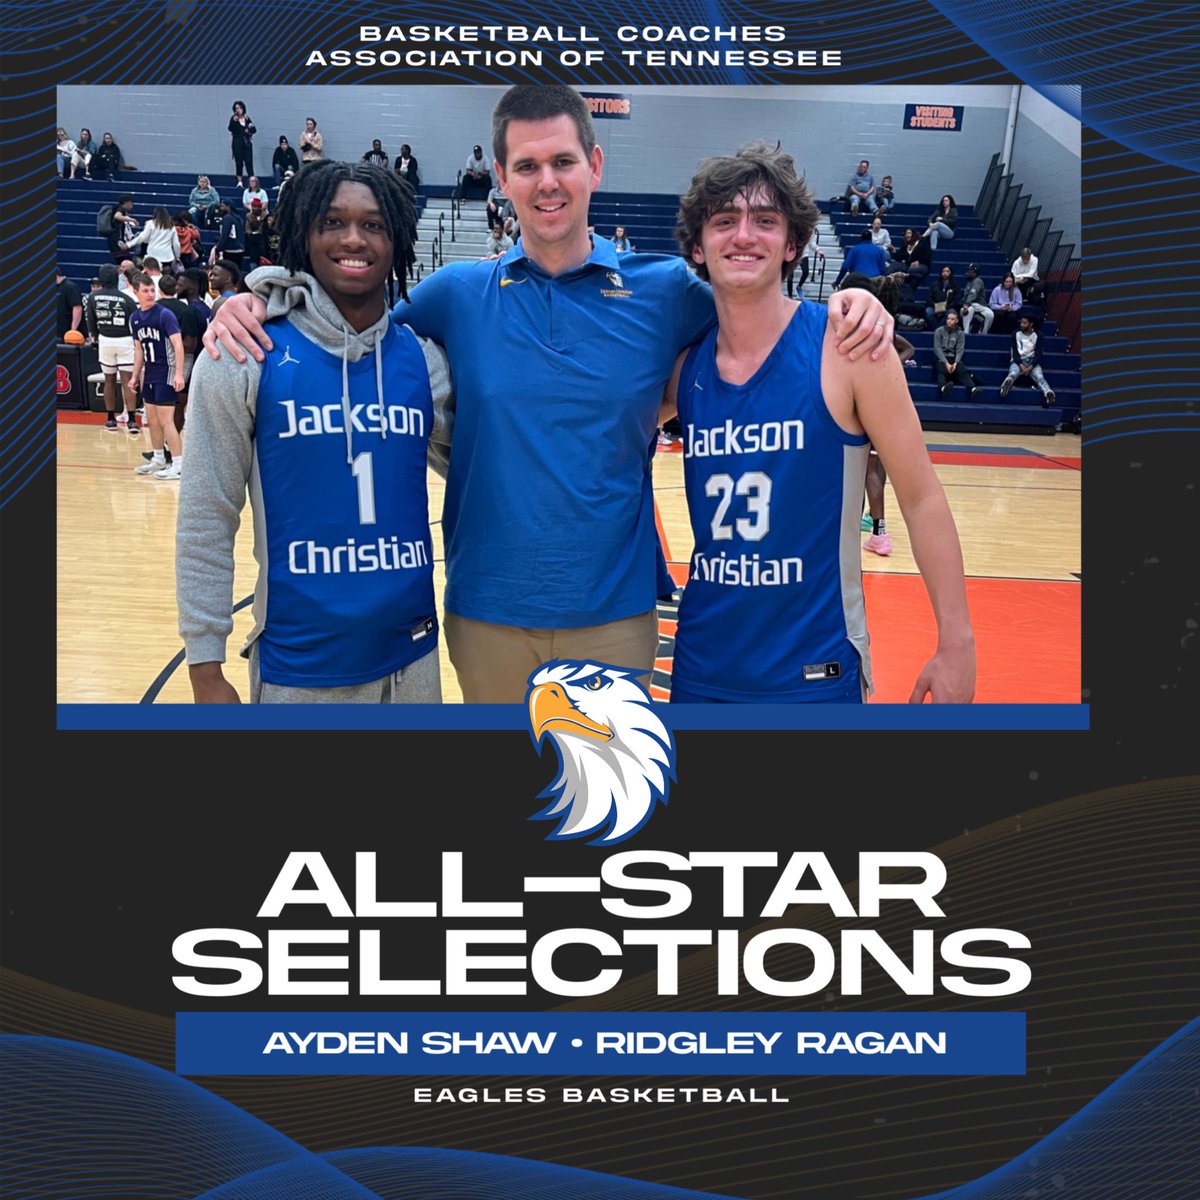 We are so proud Ayden Shaw and Ridgley Ragan for representing Jackson Christian in the 2024 BCAT All-Star for the top senior basketball players in the state of Tennessee!